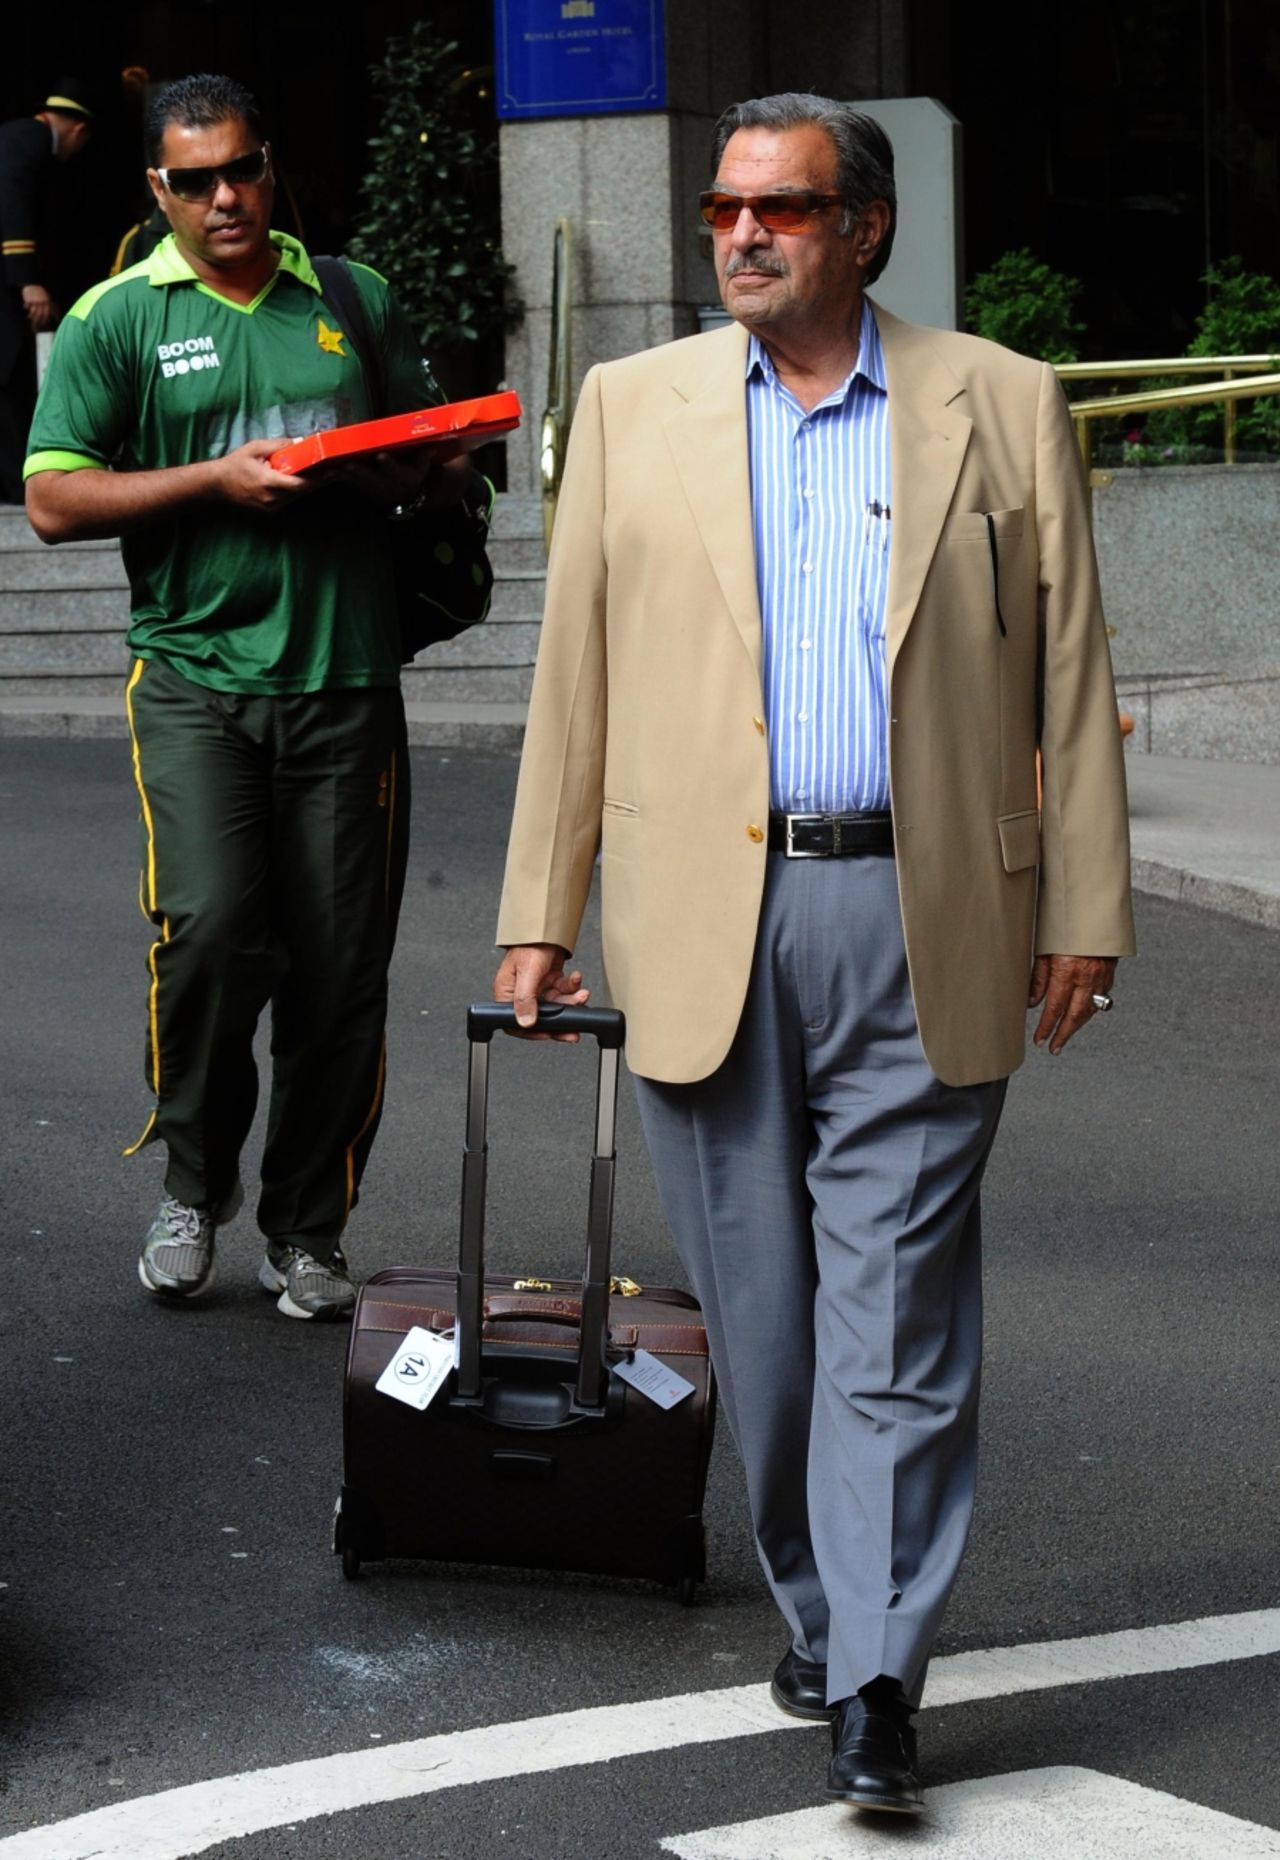 Pakistan team manager Yawar Saeed and coach Waqar Younis leave the team hotel in London, September 21 2010